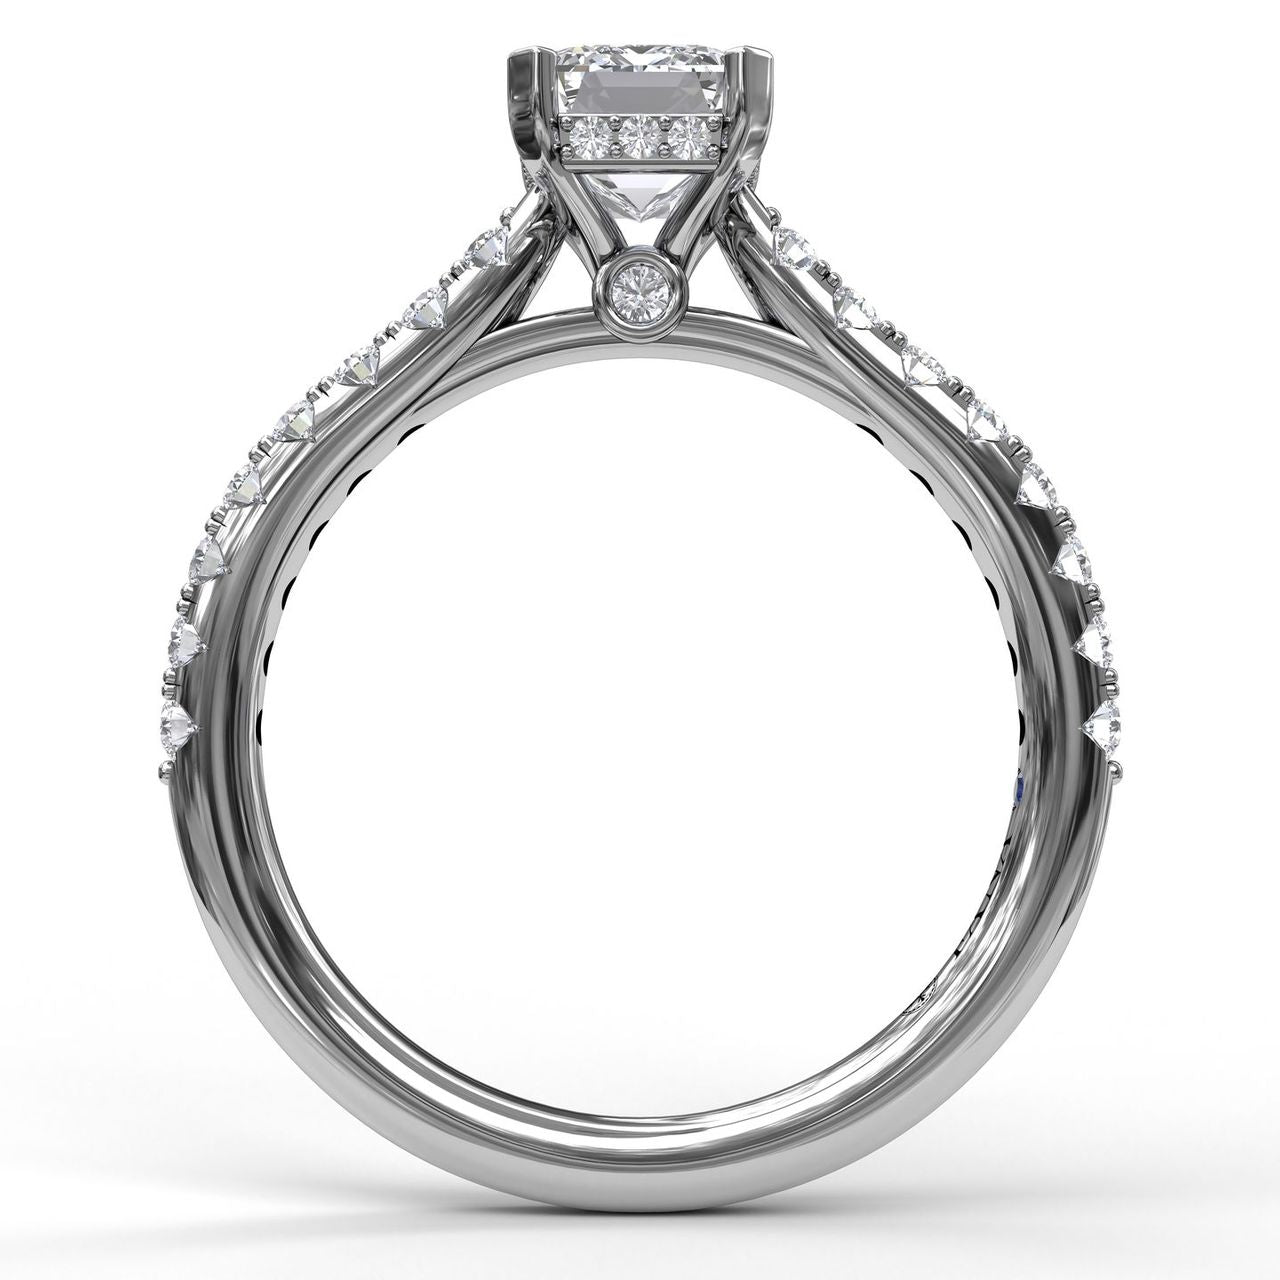 14K WHITE GOLD MICROPRONG SETTING RING